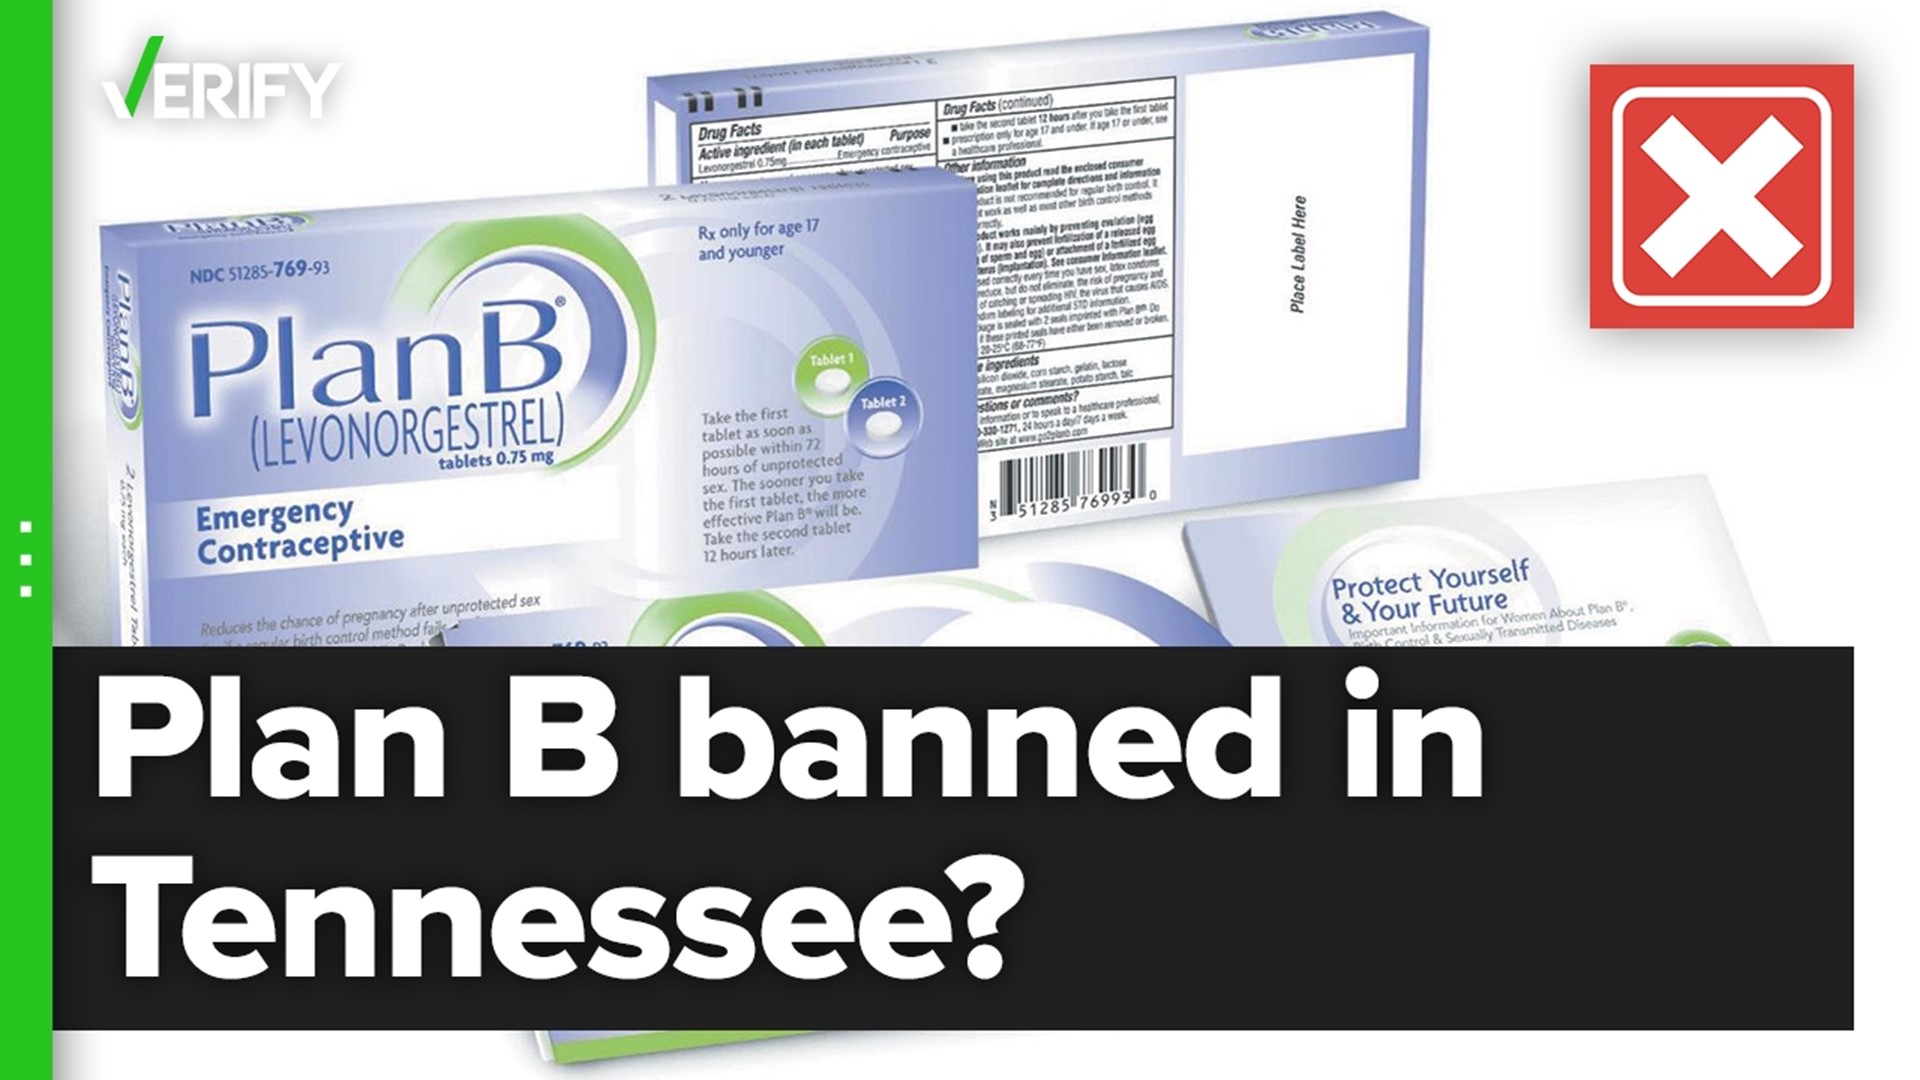 A viral tweet claimed a new law passed in Tennessee made it a crime to order emergency contraceptives. That’s false.